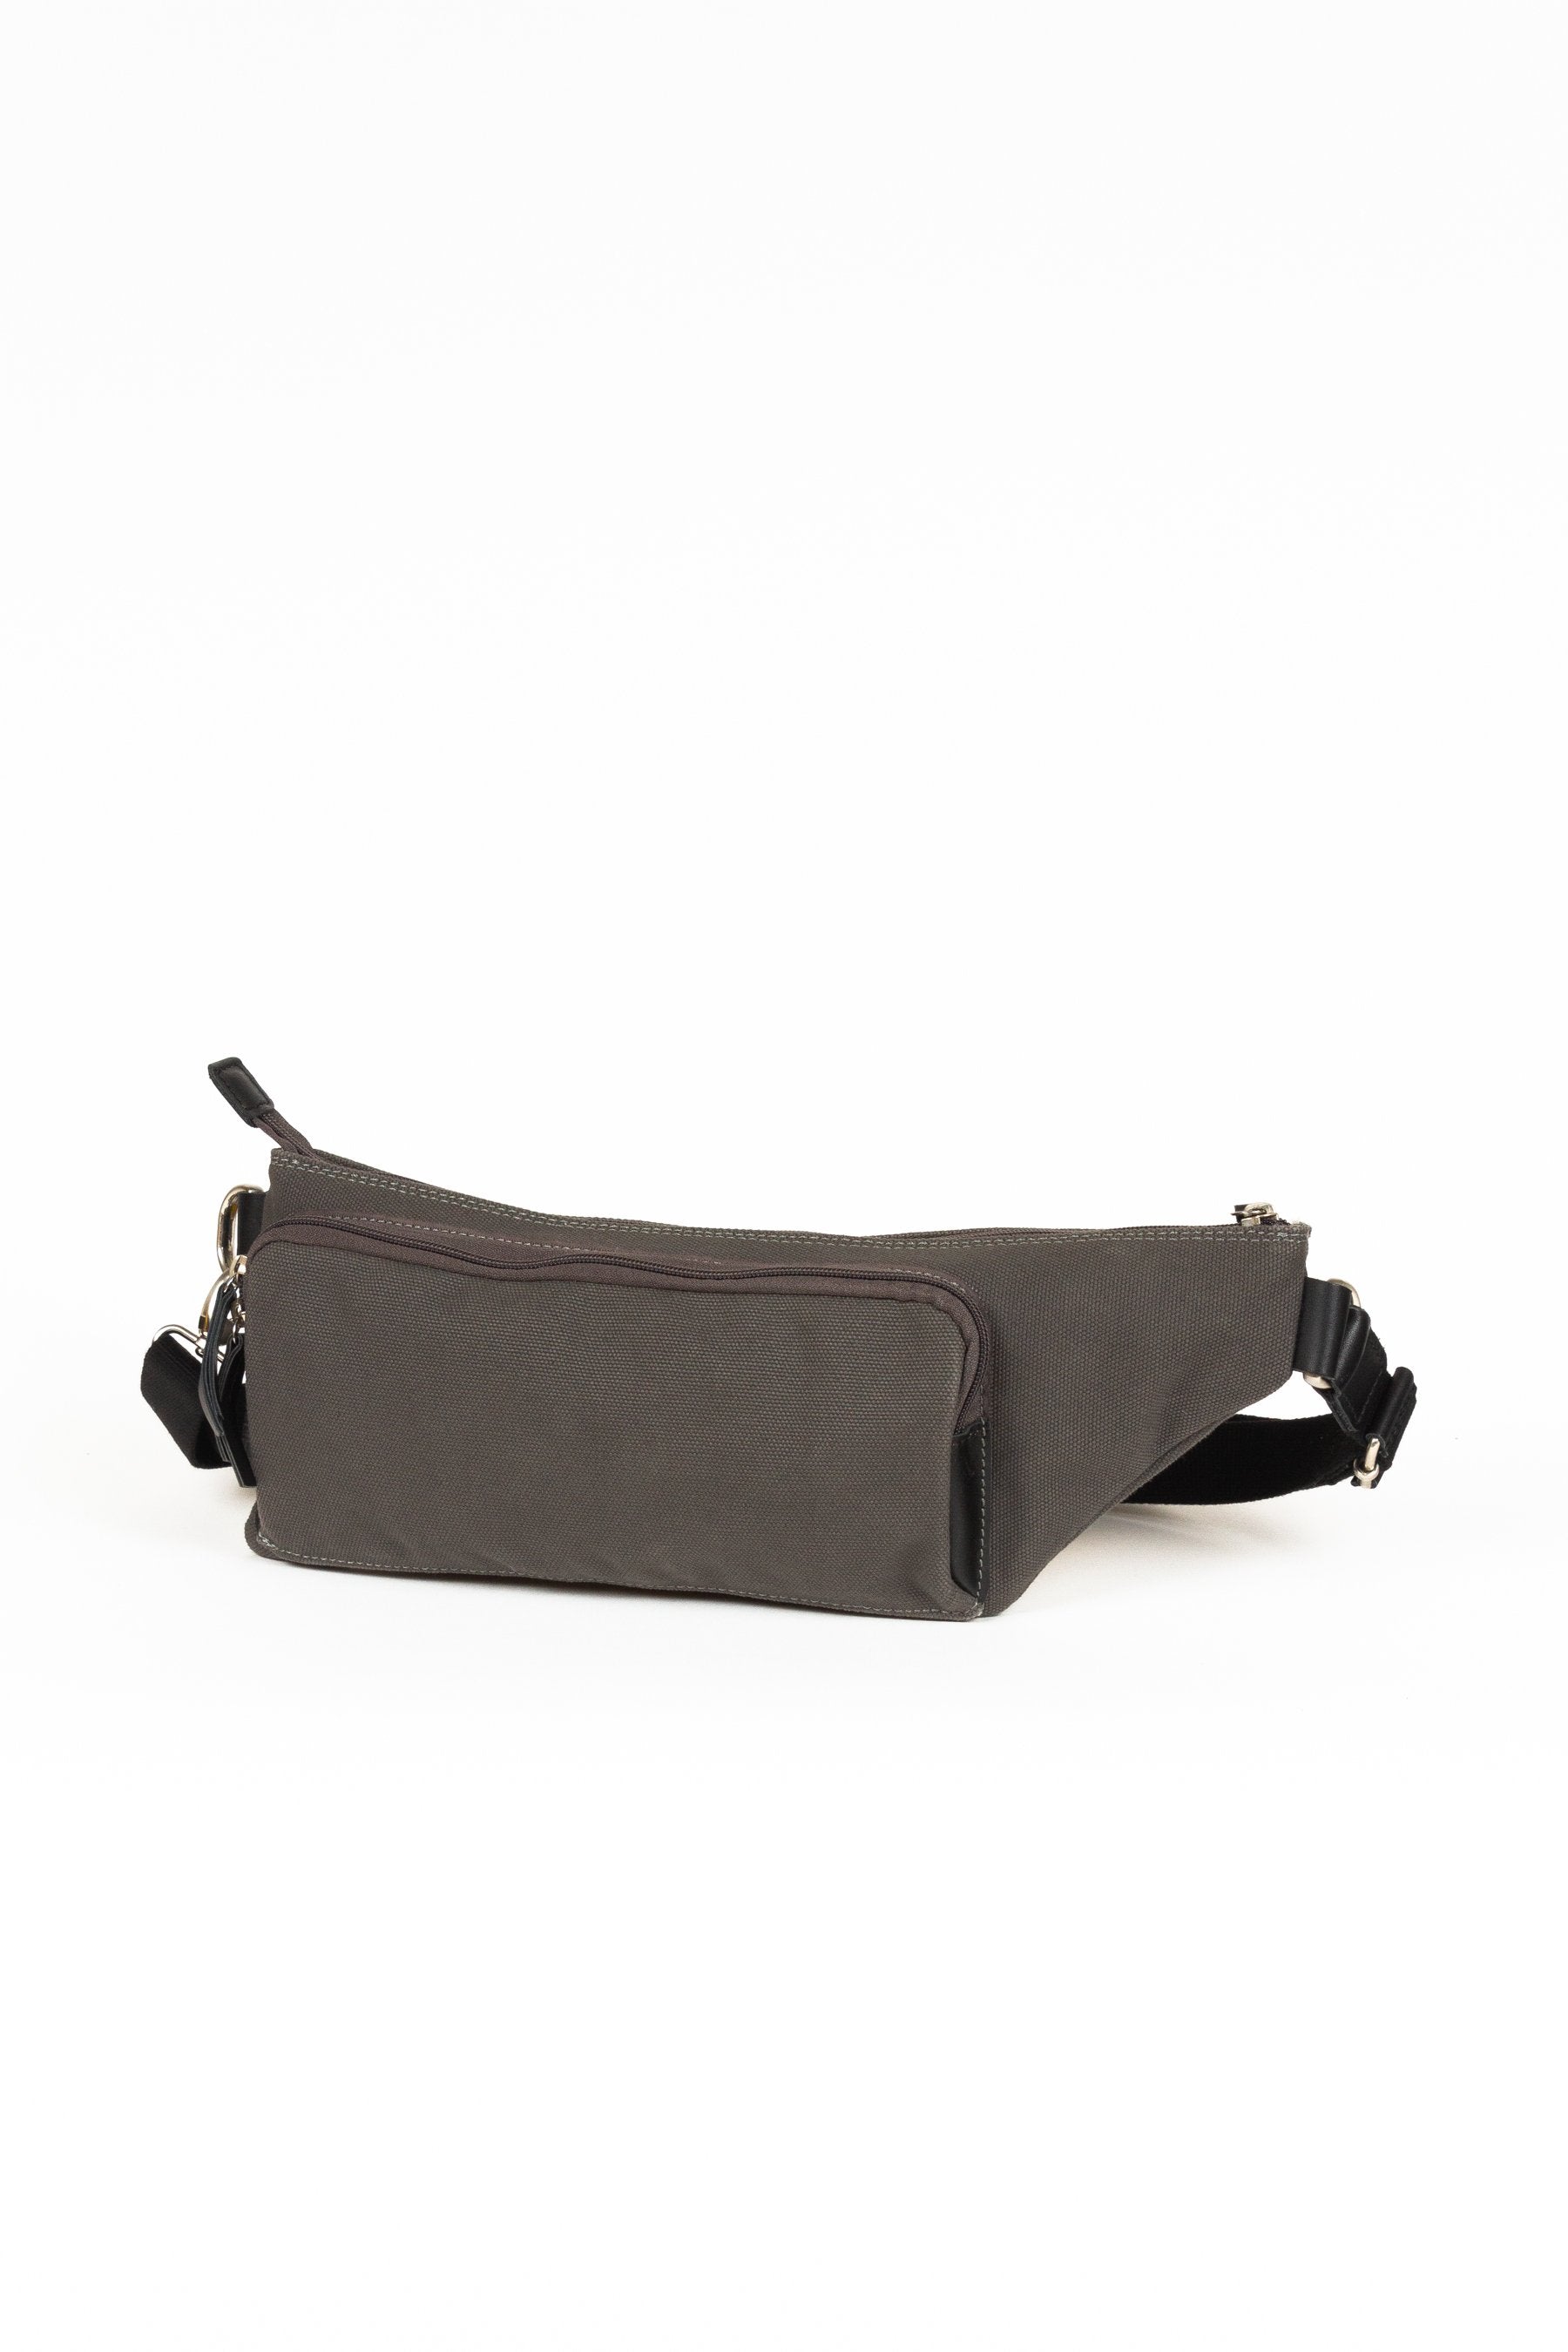 BEON.COM.AU Lund Two Pocket Sling by Jost in  Bags Jost at BEON.COM.AU